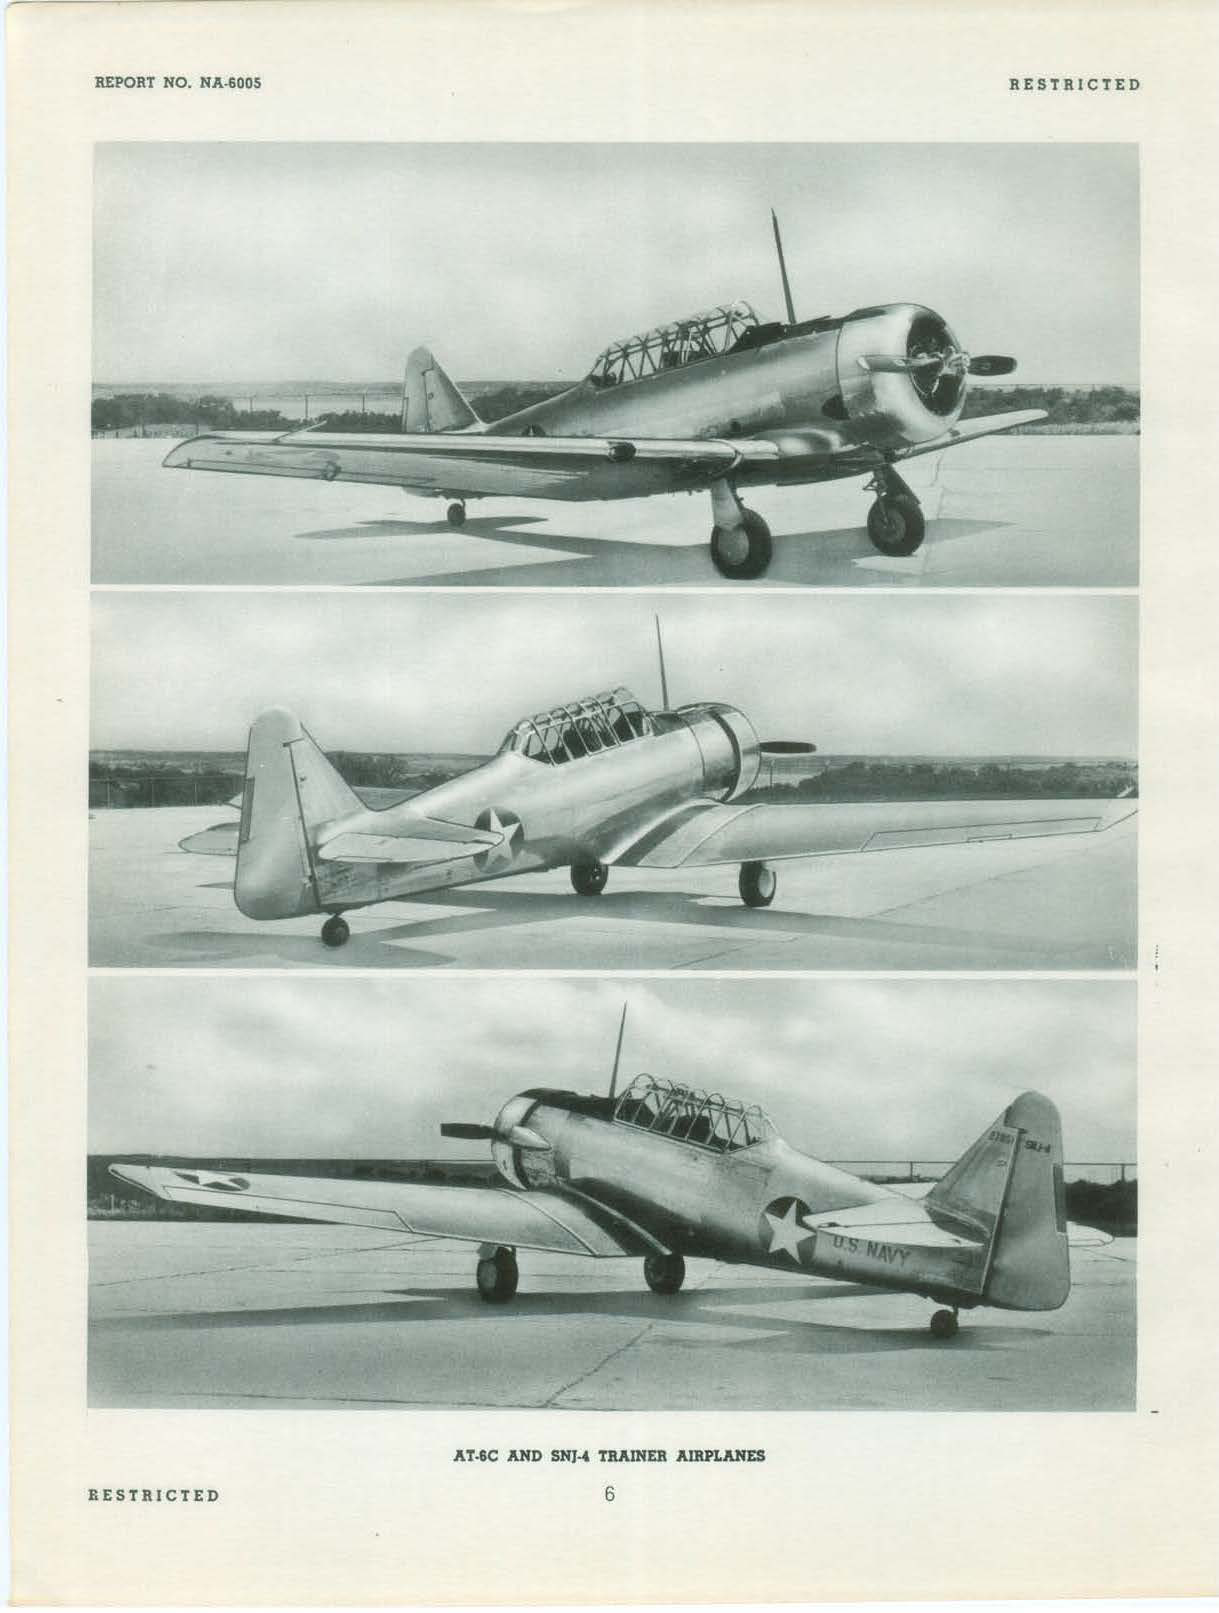 Sample page 7 from AirCorps Library document: Flight Operating Instructions for Texan Trainer -AT-6C, AT-6D, SNJ-4 and SNJ-5